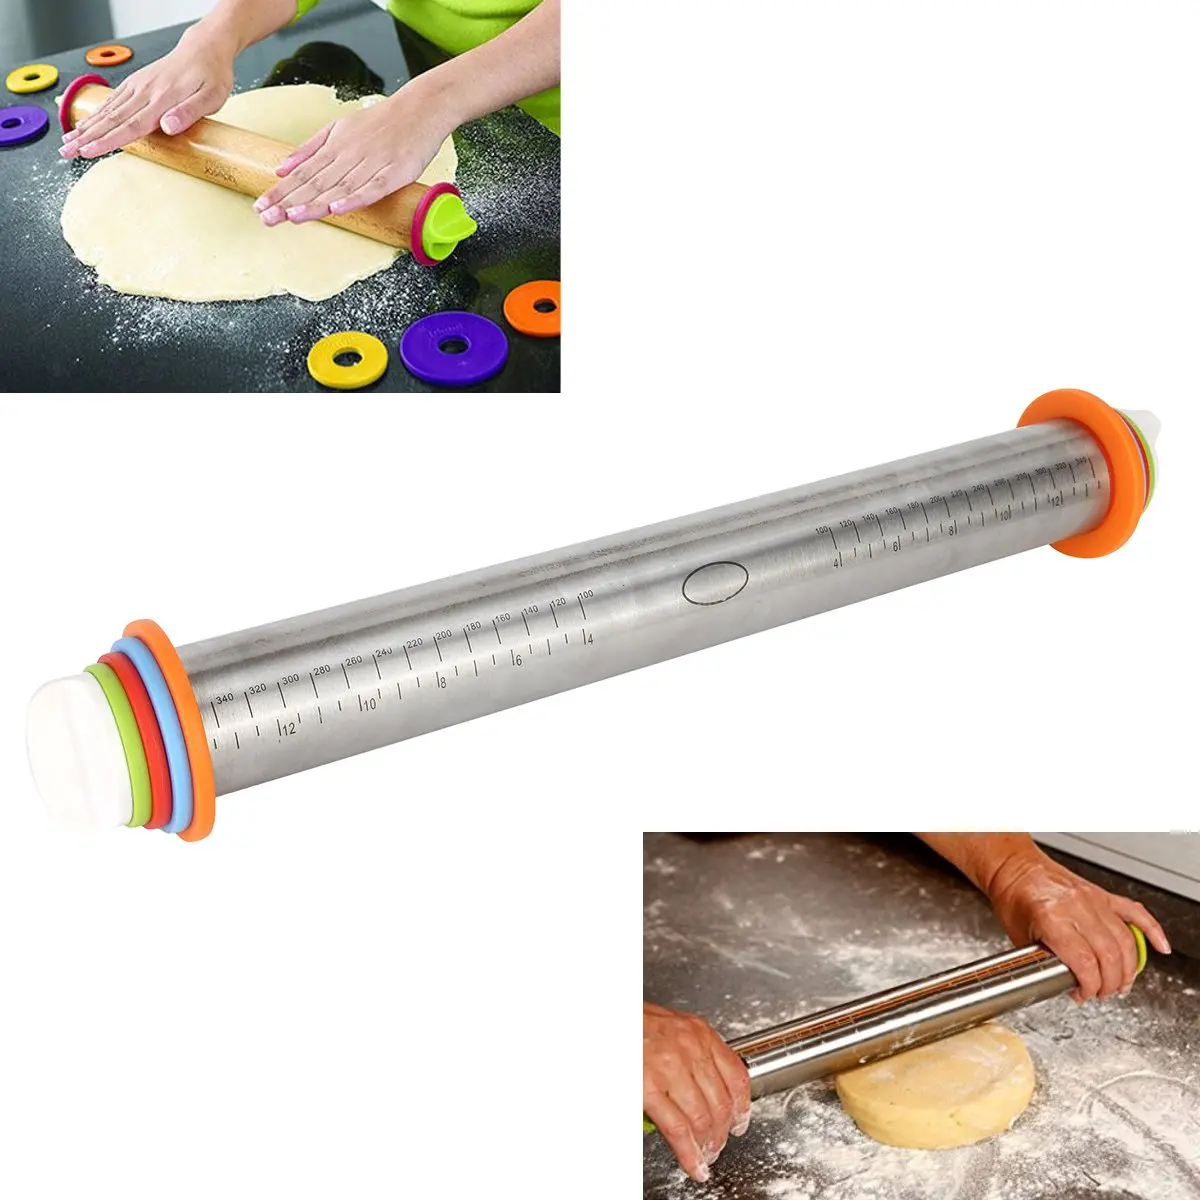  Stainless Steel Removable Rolling Pin Tools For Baking Dough Pizza Cookies 4 Sizes Adjusting Discs